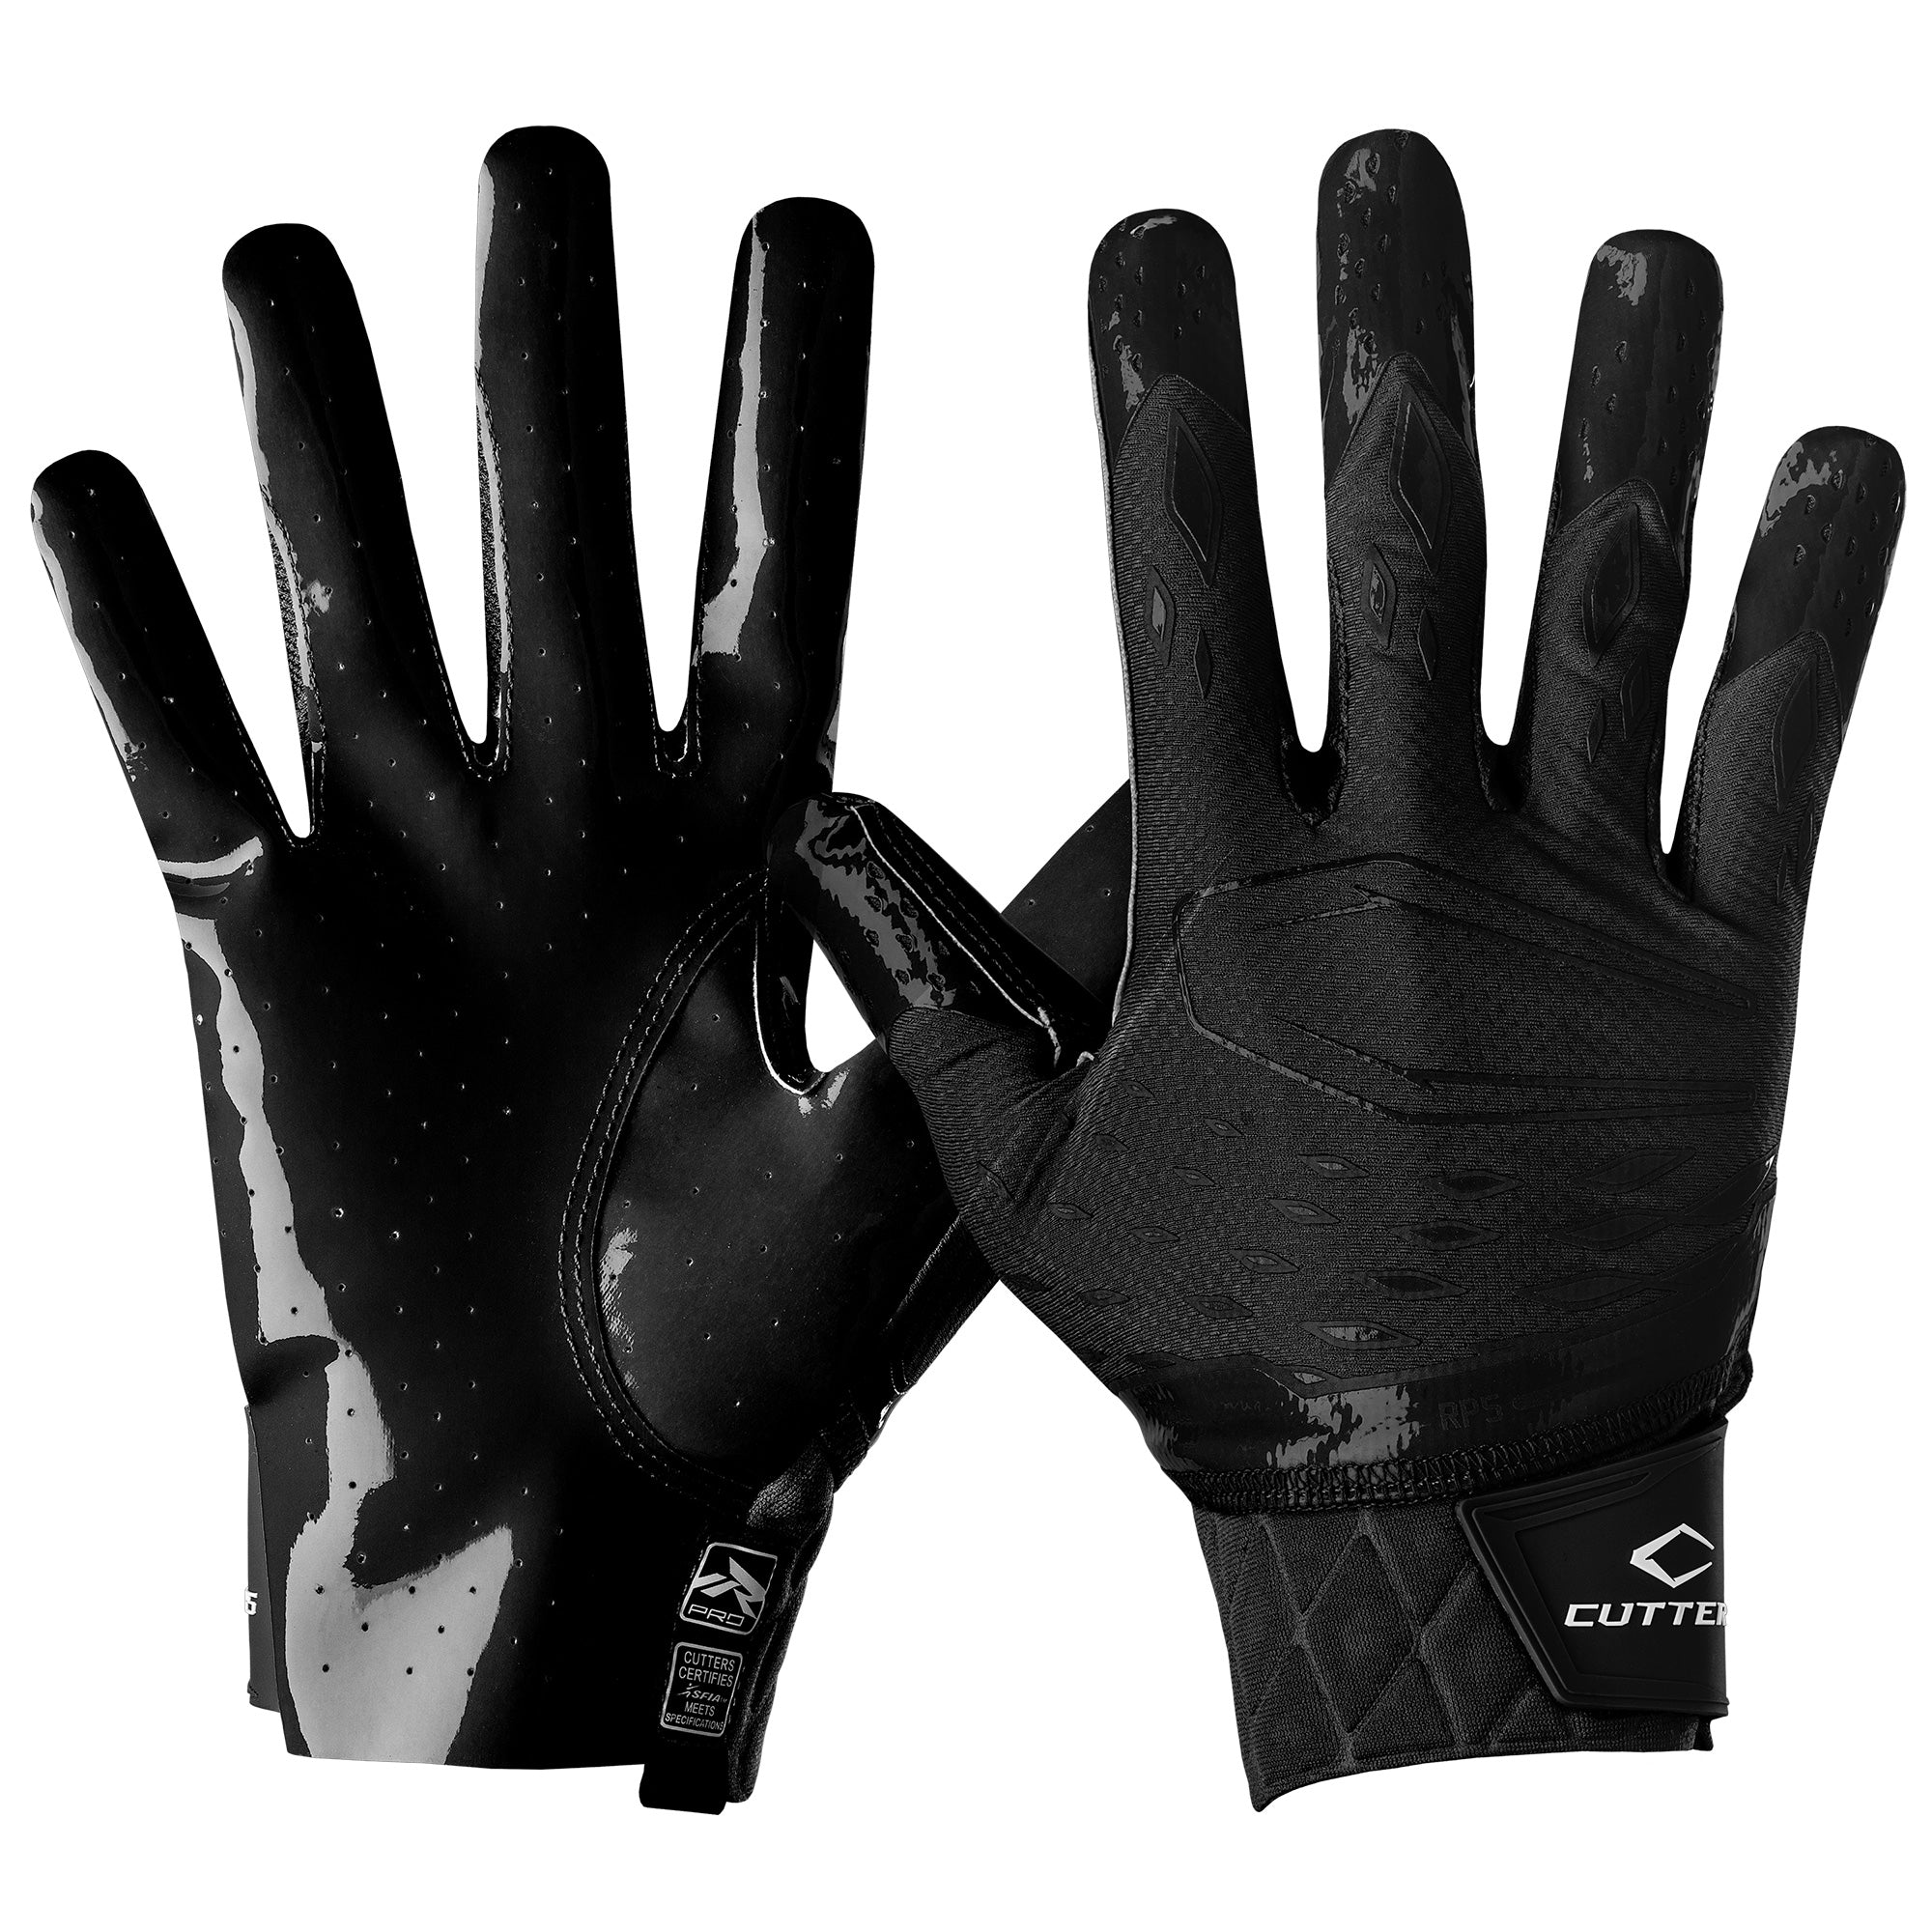 Cutters Men's Rev Pro 5.0 Receiver Gloves Accessories United Sports Brands Small Black 